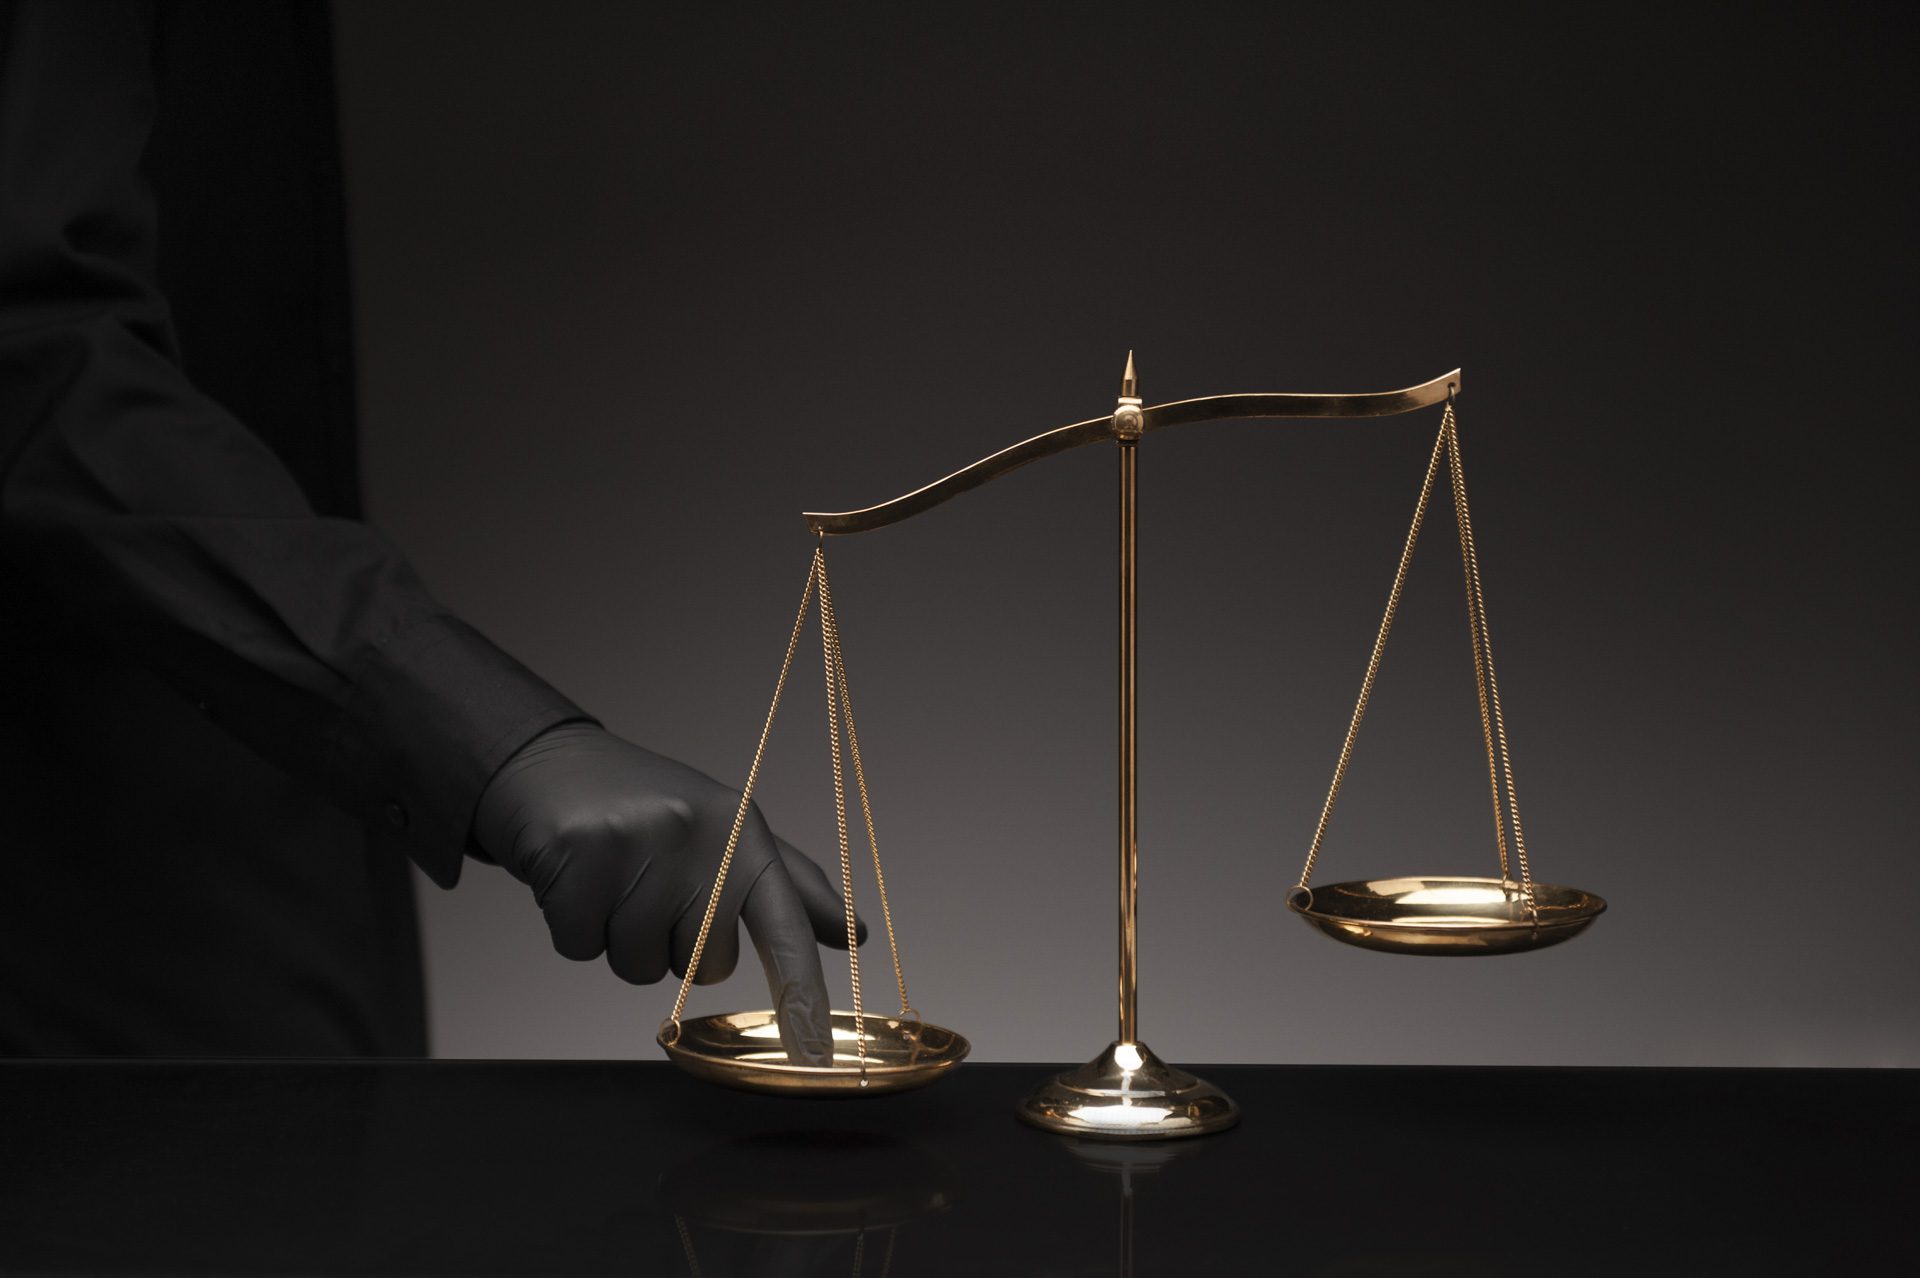 Someone wearing black shirt pressing the imbalance scale on black glass desktop and black background, cheating in a lawyer's office, Concept of injustice, espionage, partiality, law.